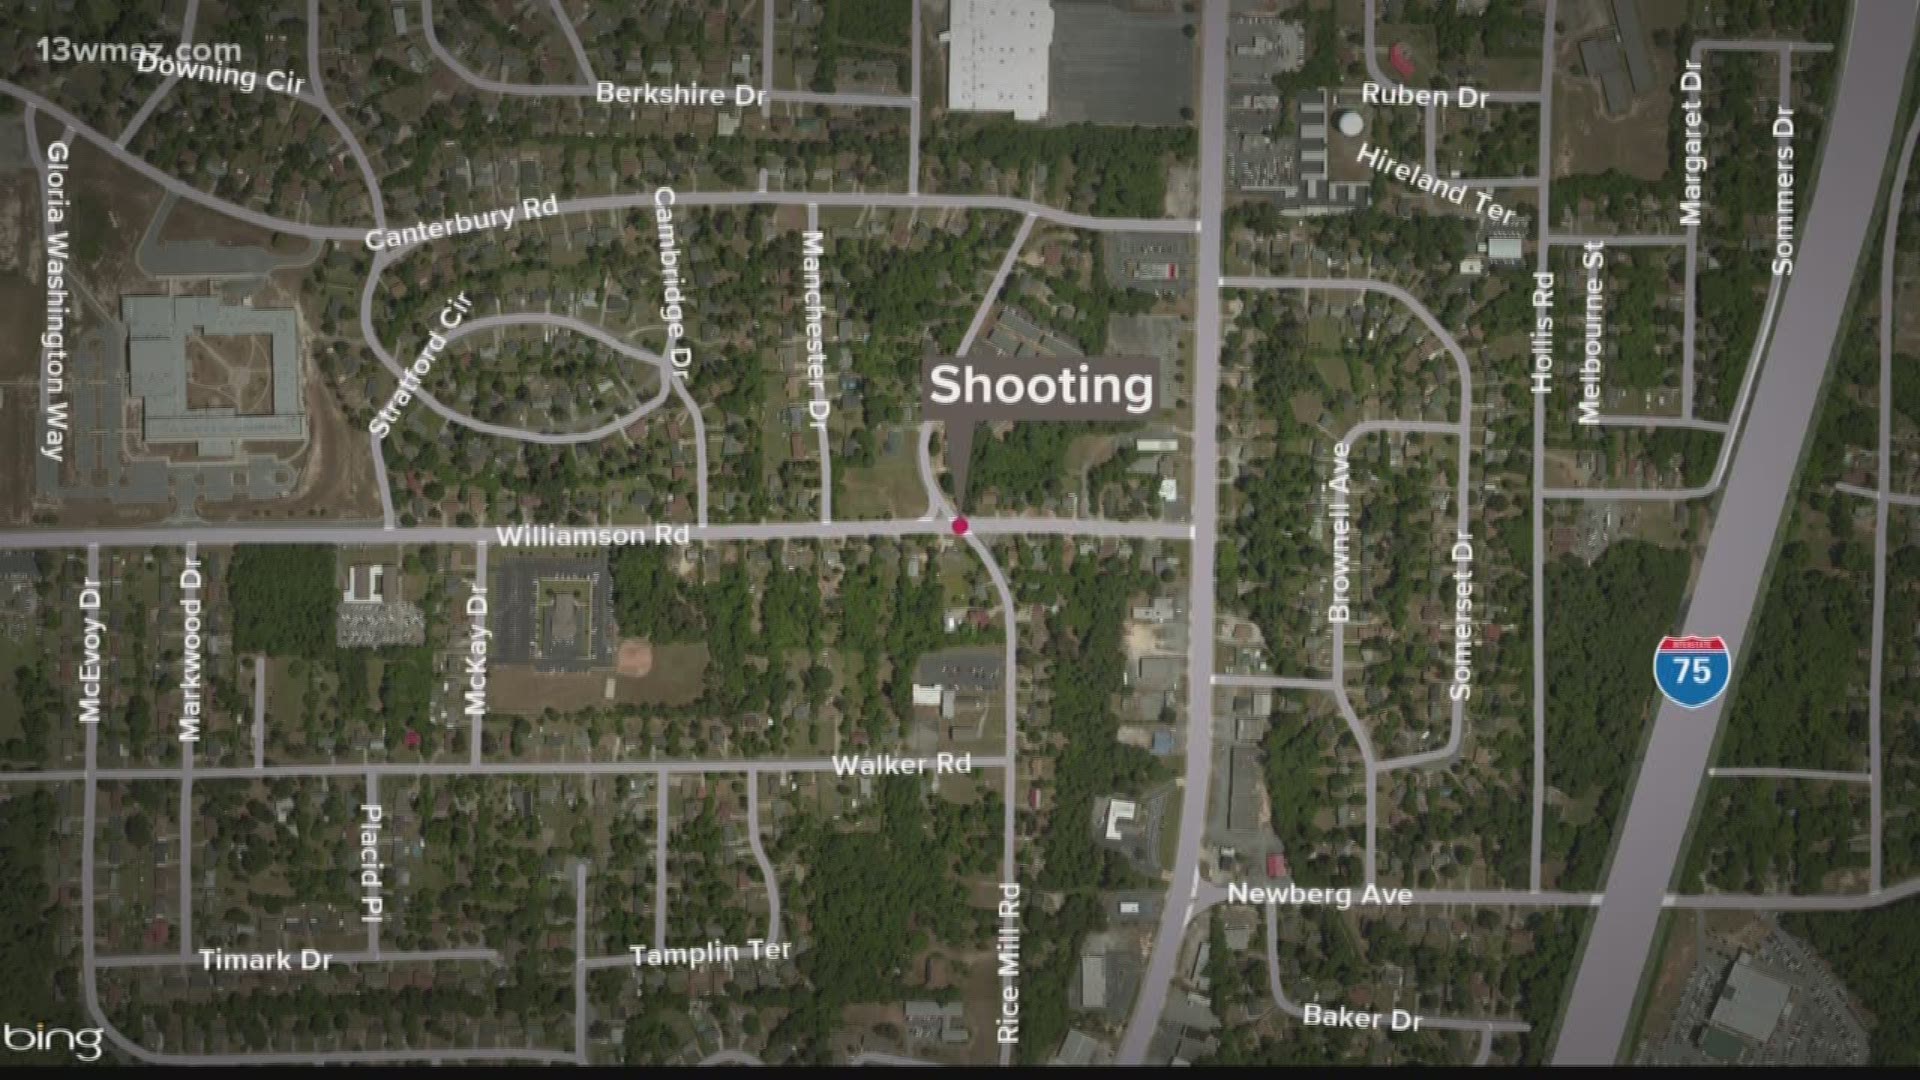 Two teens were injured in a shooting that happened early Saturday morning in south Bibb near Williamson Road and Rice Mill Road. The teens are recovering in the hospital and are listed in stable condition.